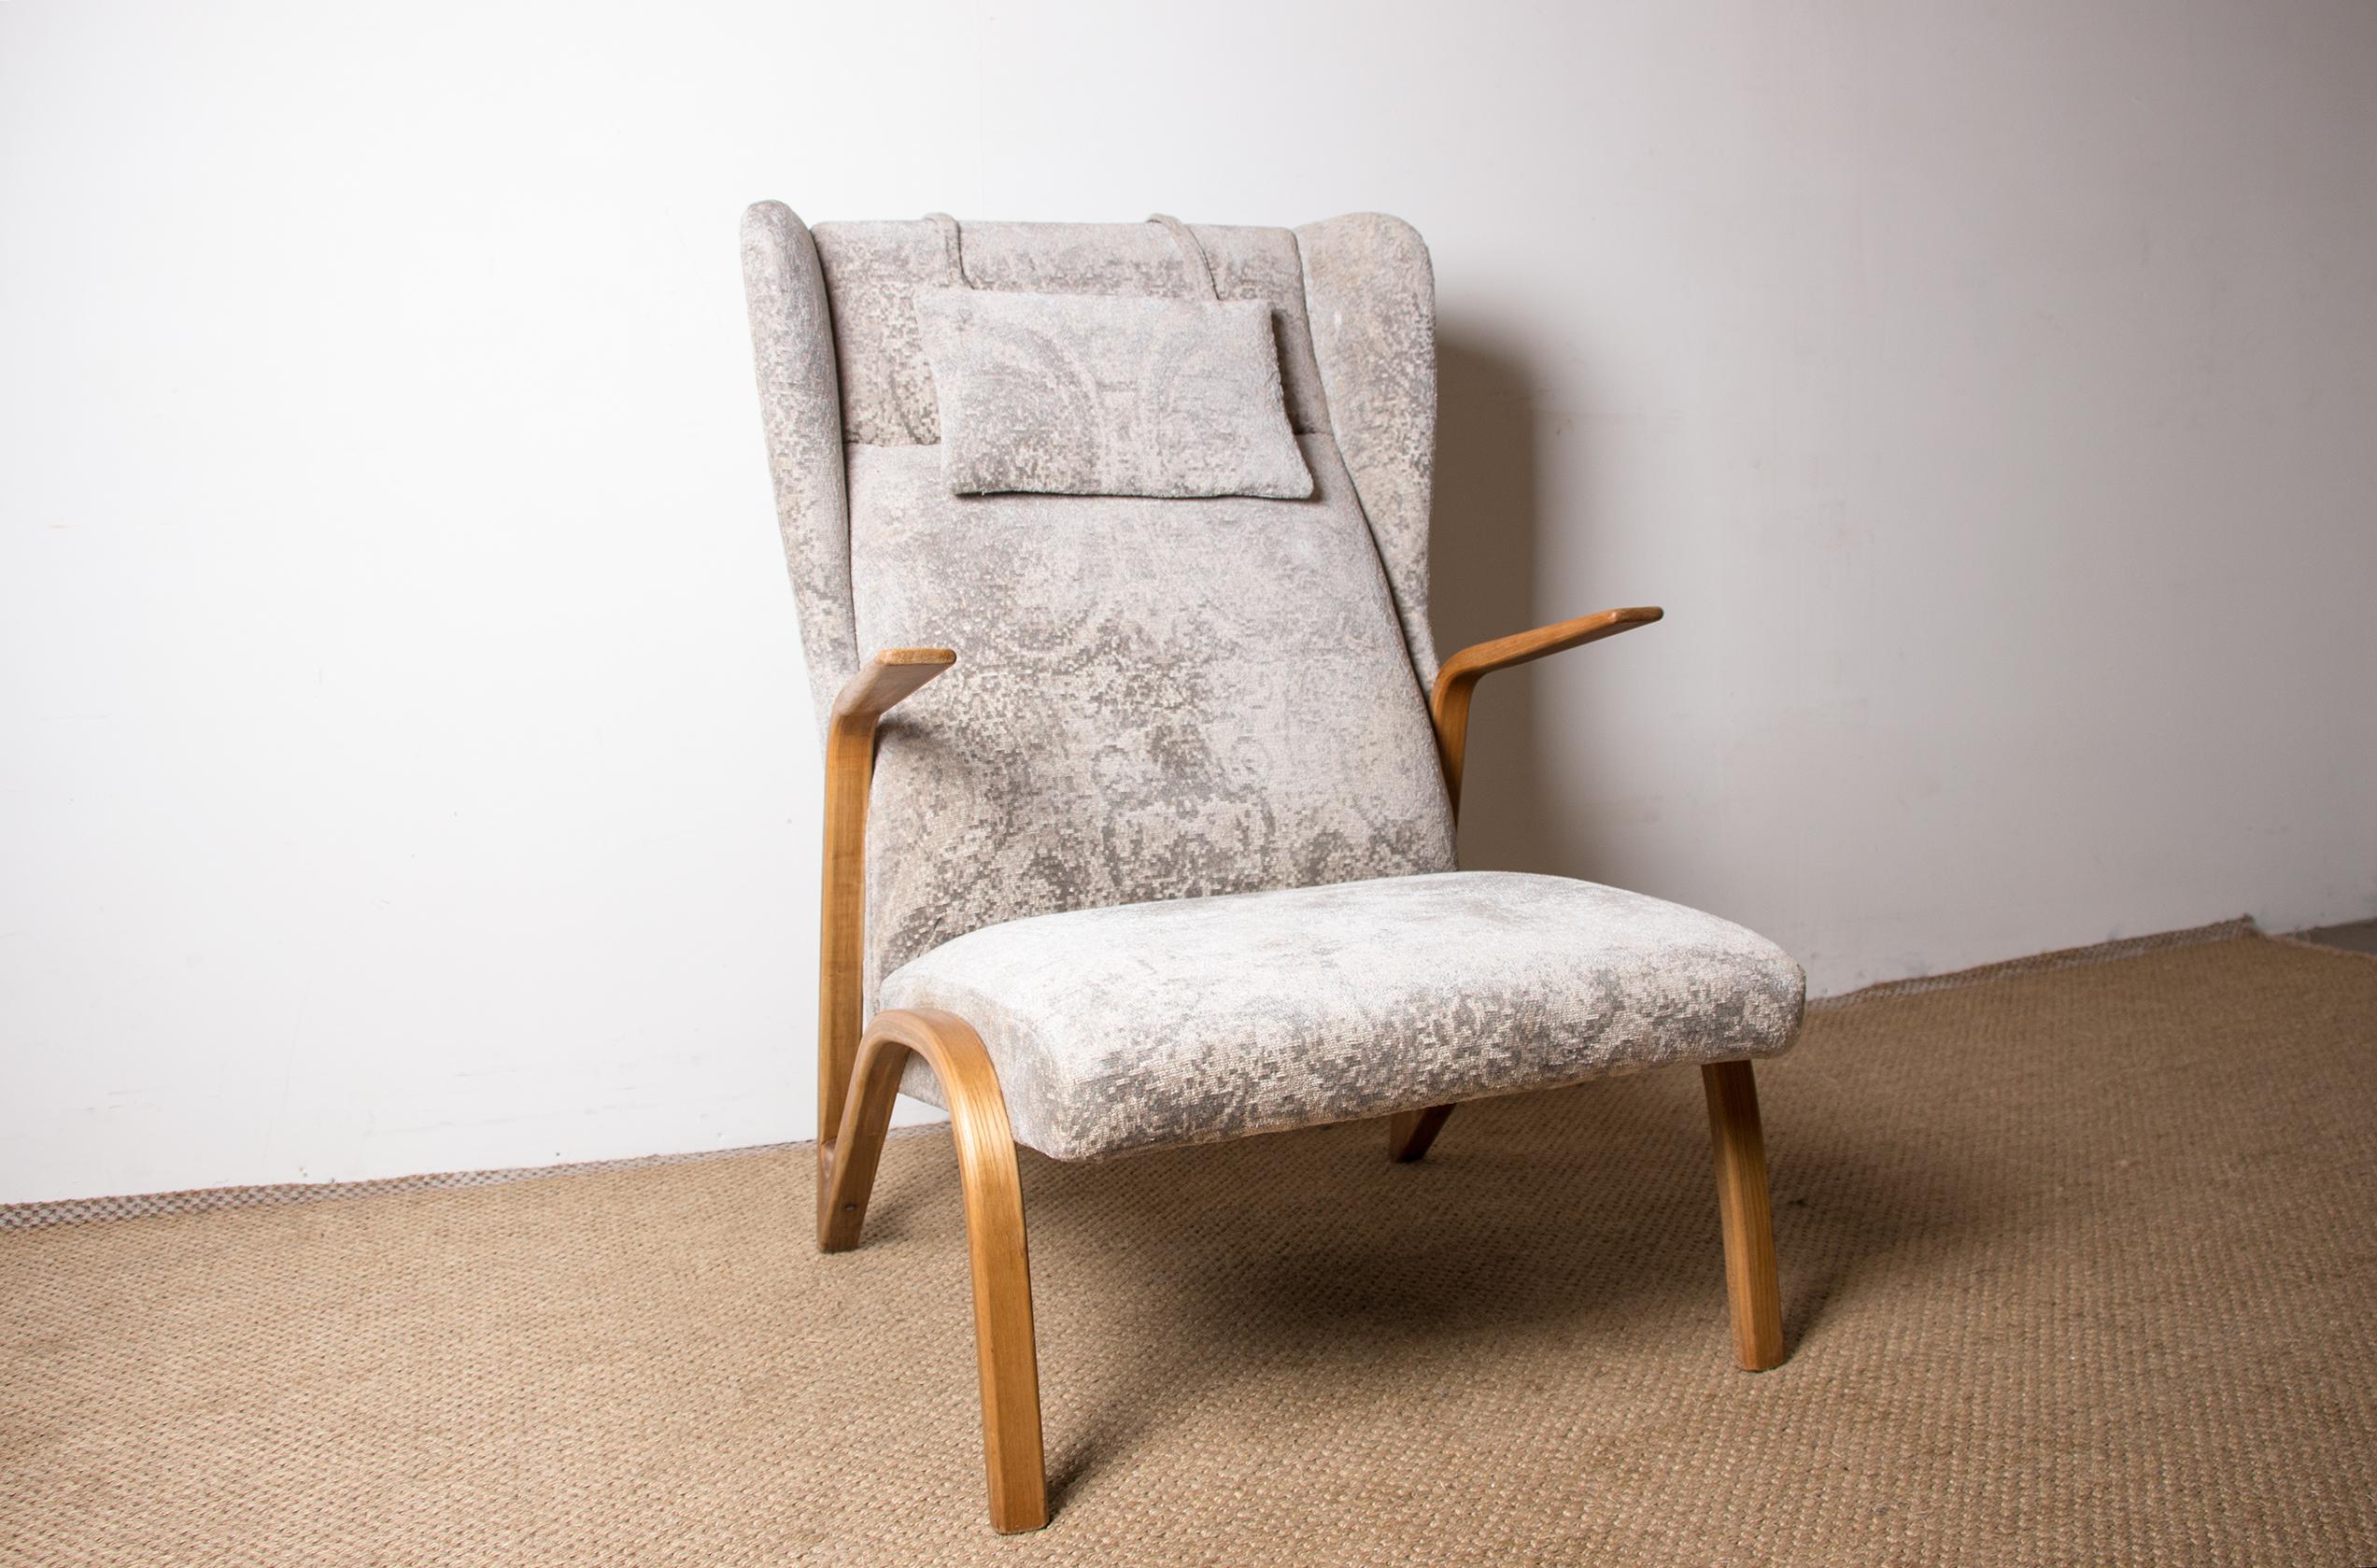 Superb Scandinavian high armchair. Its graceful structure in single-block curved wood gives it a very elegant airy design. The whole, seat and raised backrest (covered with a headrest) have been completely reupholstered in Zimmer + Rhode velvet